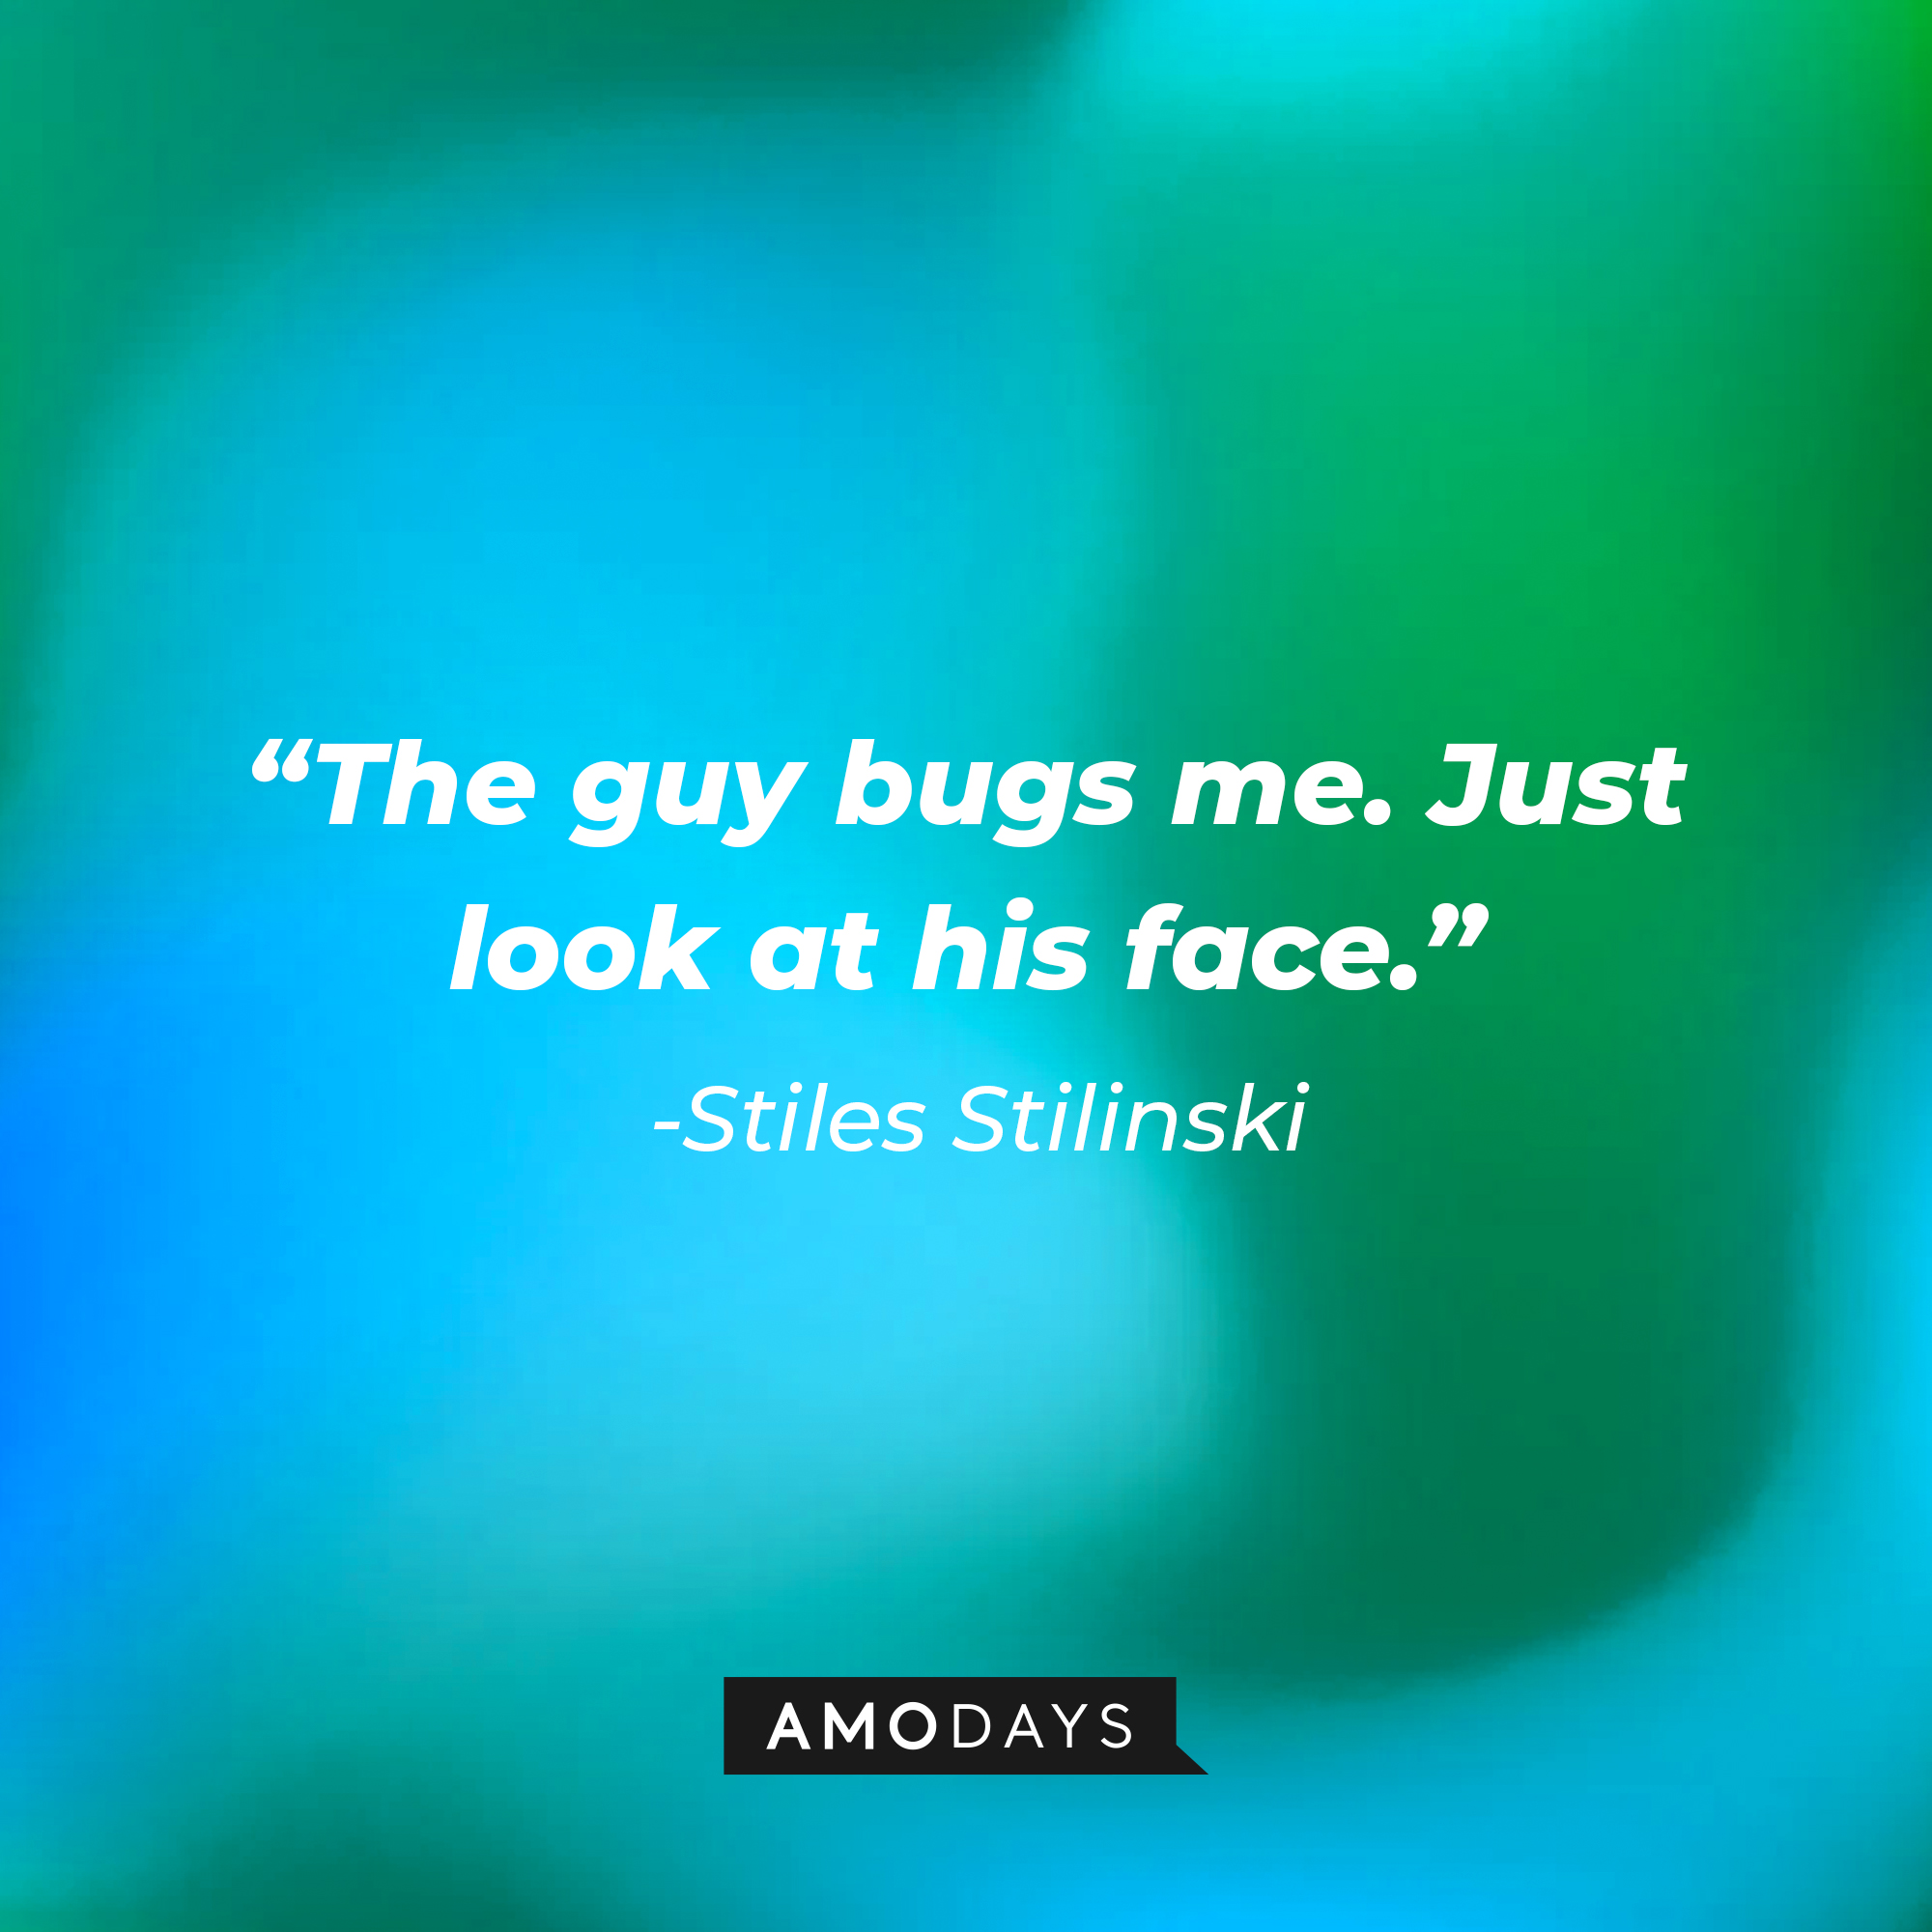 Stiles Stilinski's quote: "The guy bugs me. Just look at his face." | Image: AmoDays